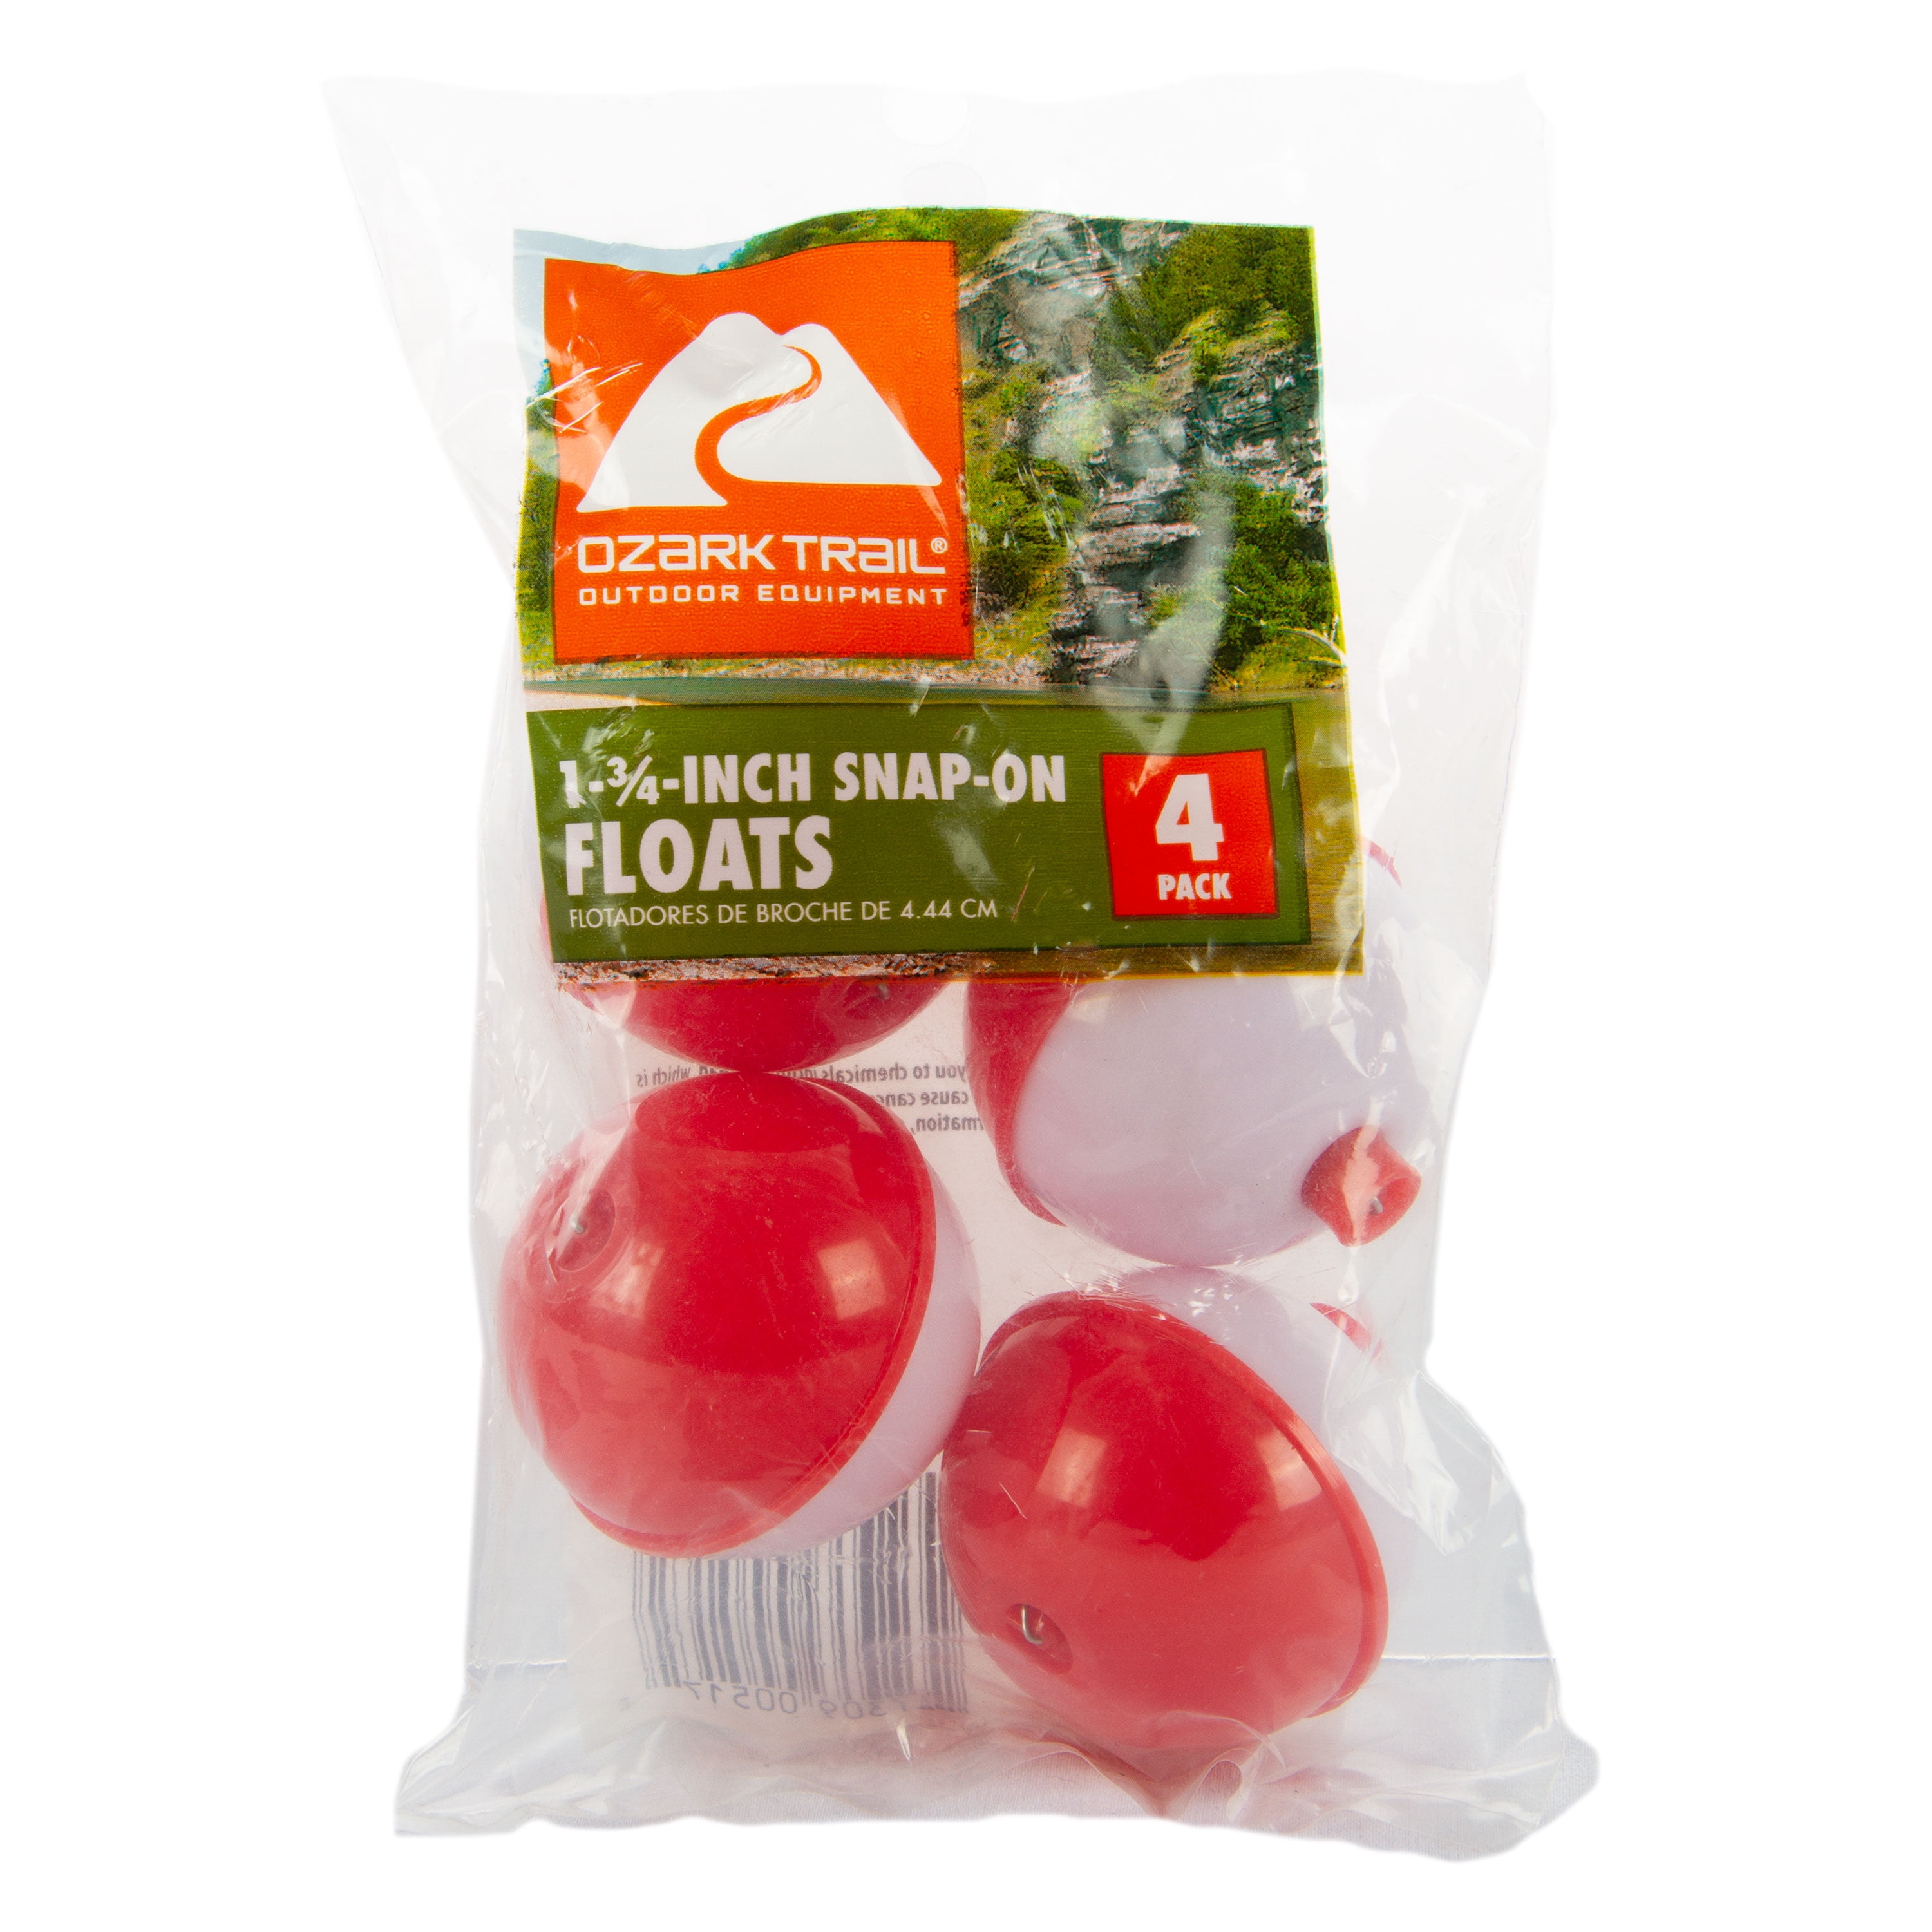 Ozark Trail 1 3/4" Round Floa. These One and three quarte inch durable plastic floats feature easy on and off spring attachment. Multi Color for better visibility.